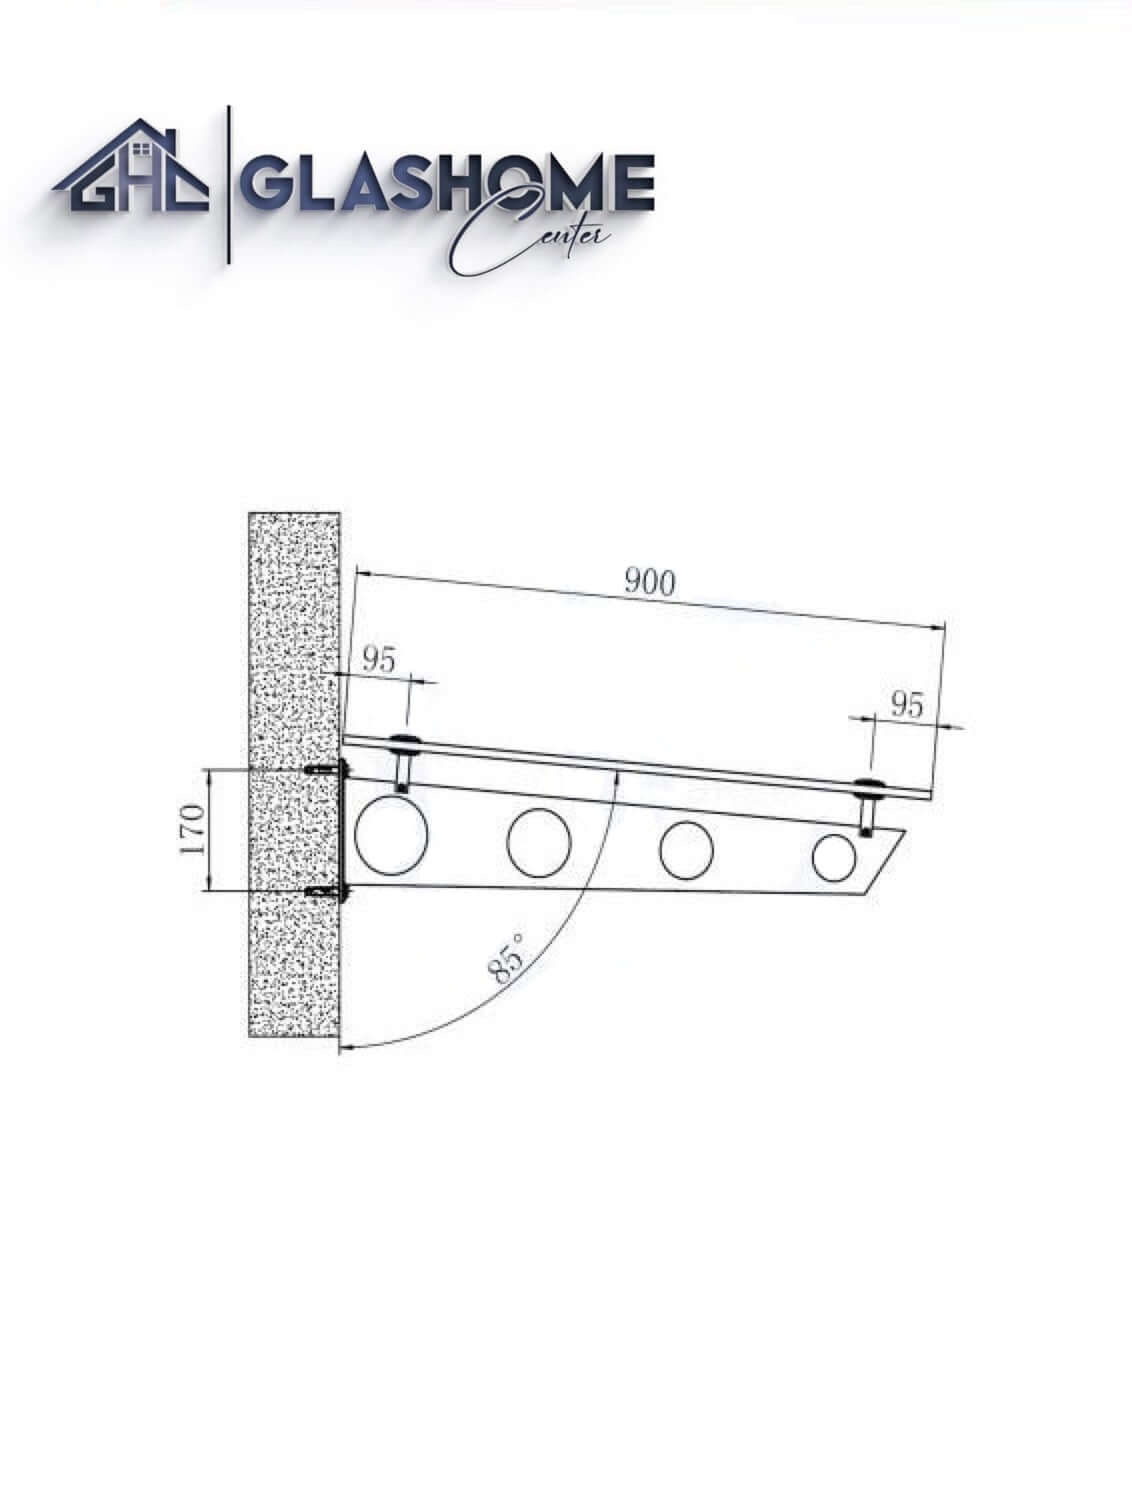 GlasHomeCenter - glass canopy - gray glass - 230x90cm - 13.1mm laminated safety glass - incl. 3 stainless steel brackets variant "Stockholm"